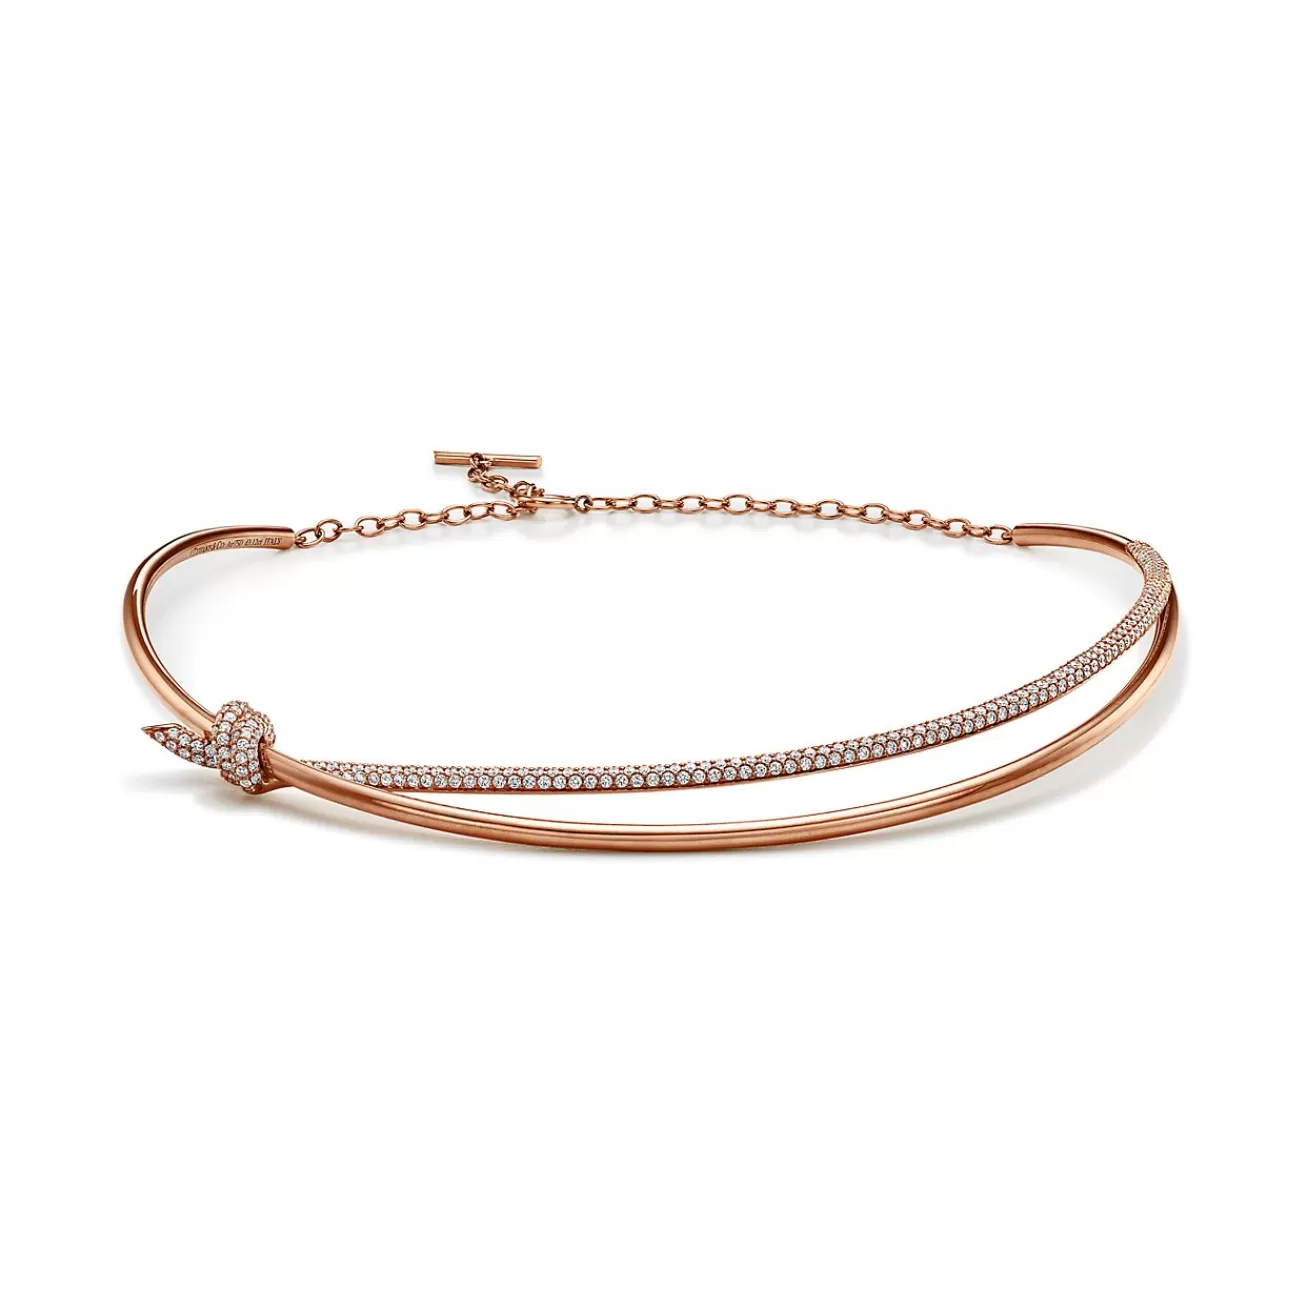 Tiffany & Co. Tiffany Knot Double Row Necklace in Rose Gold with Diamonds | ^ Necklaces & Pendants | Rose Gold Jewelry